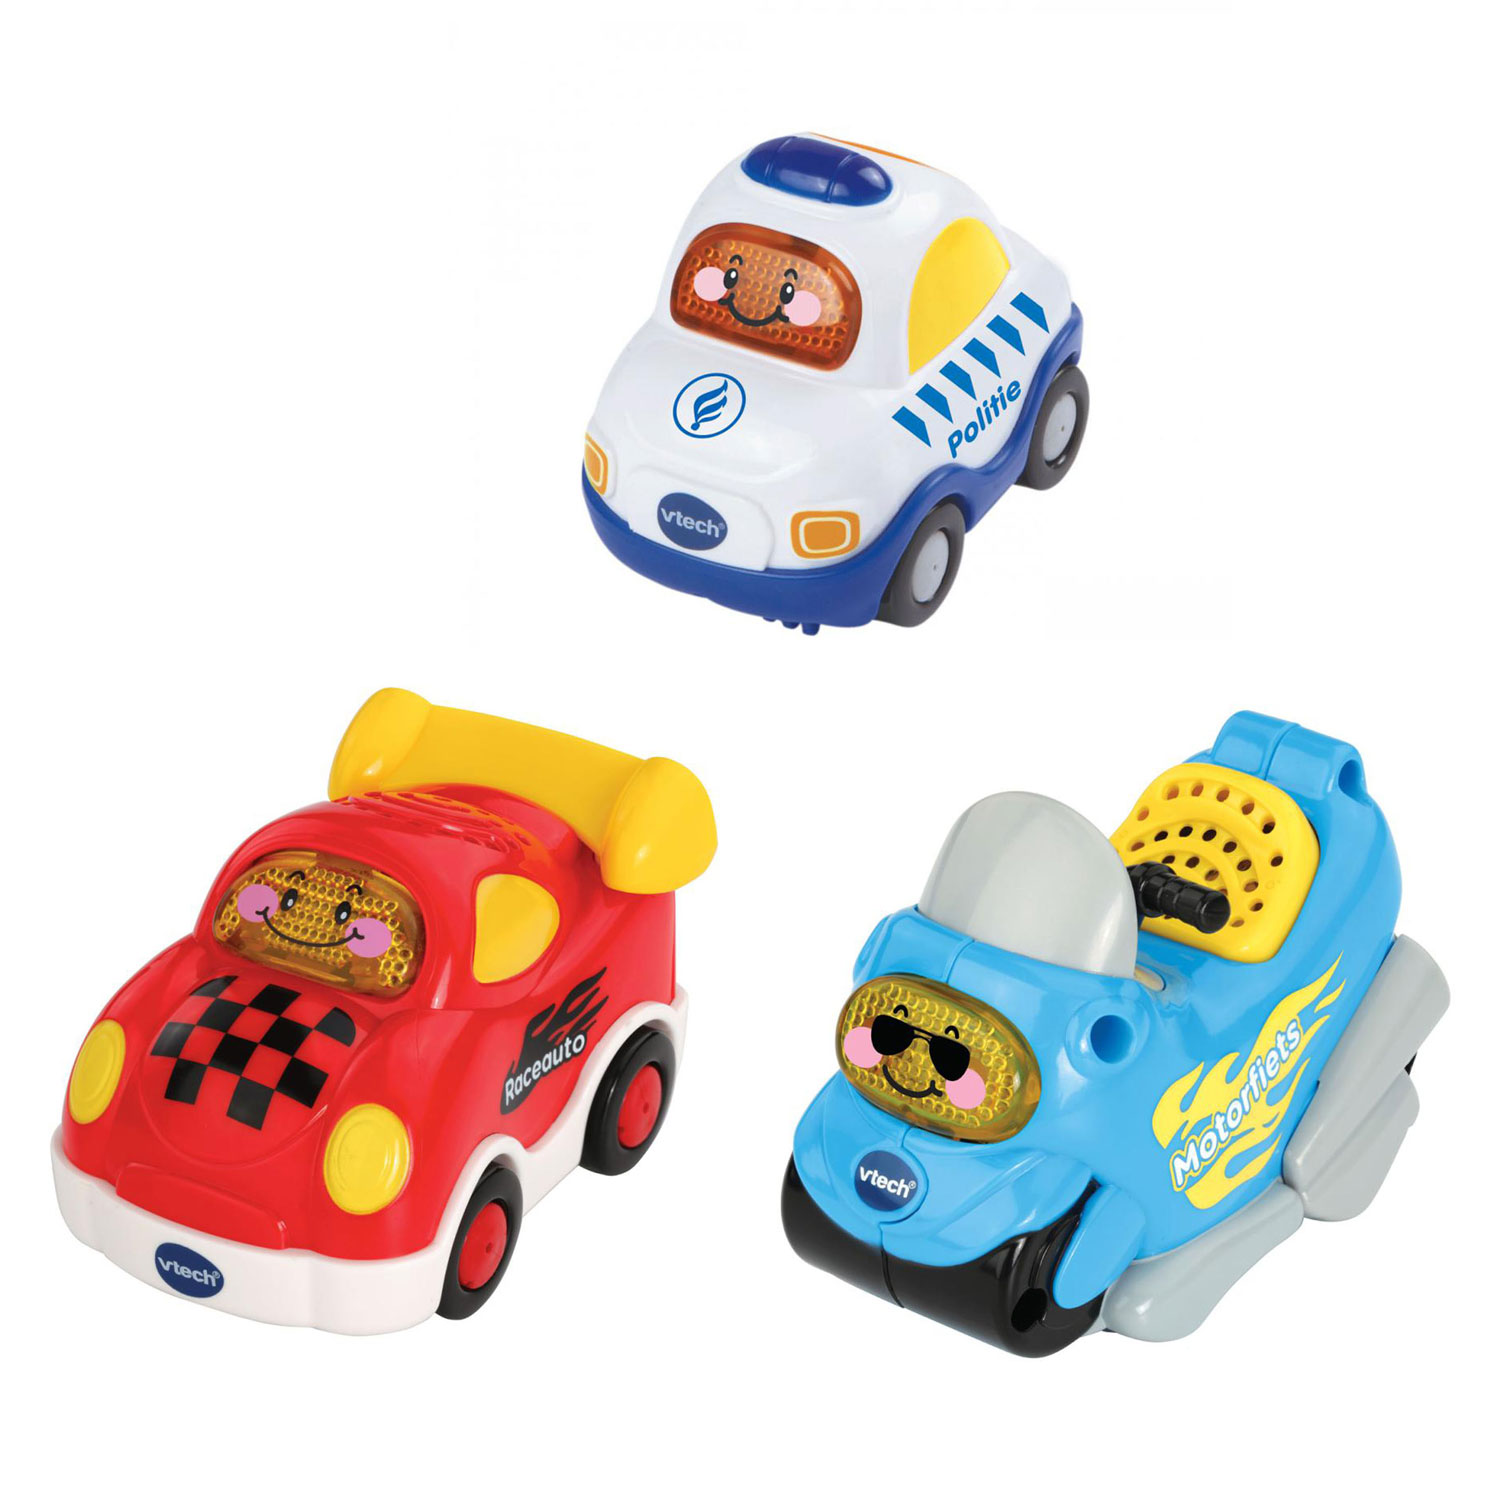 VTech Toet Toet Cars - Packaging | Thimble Toys